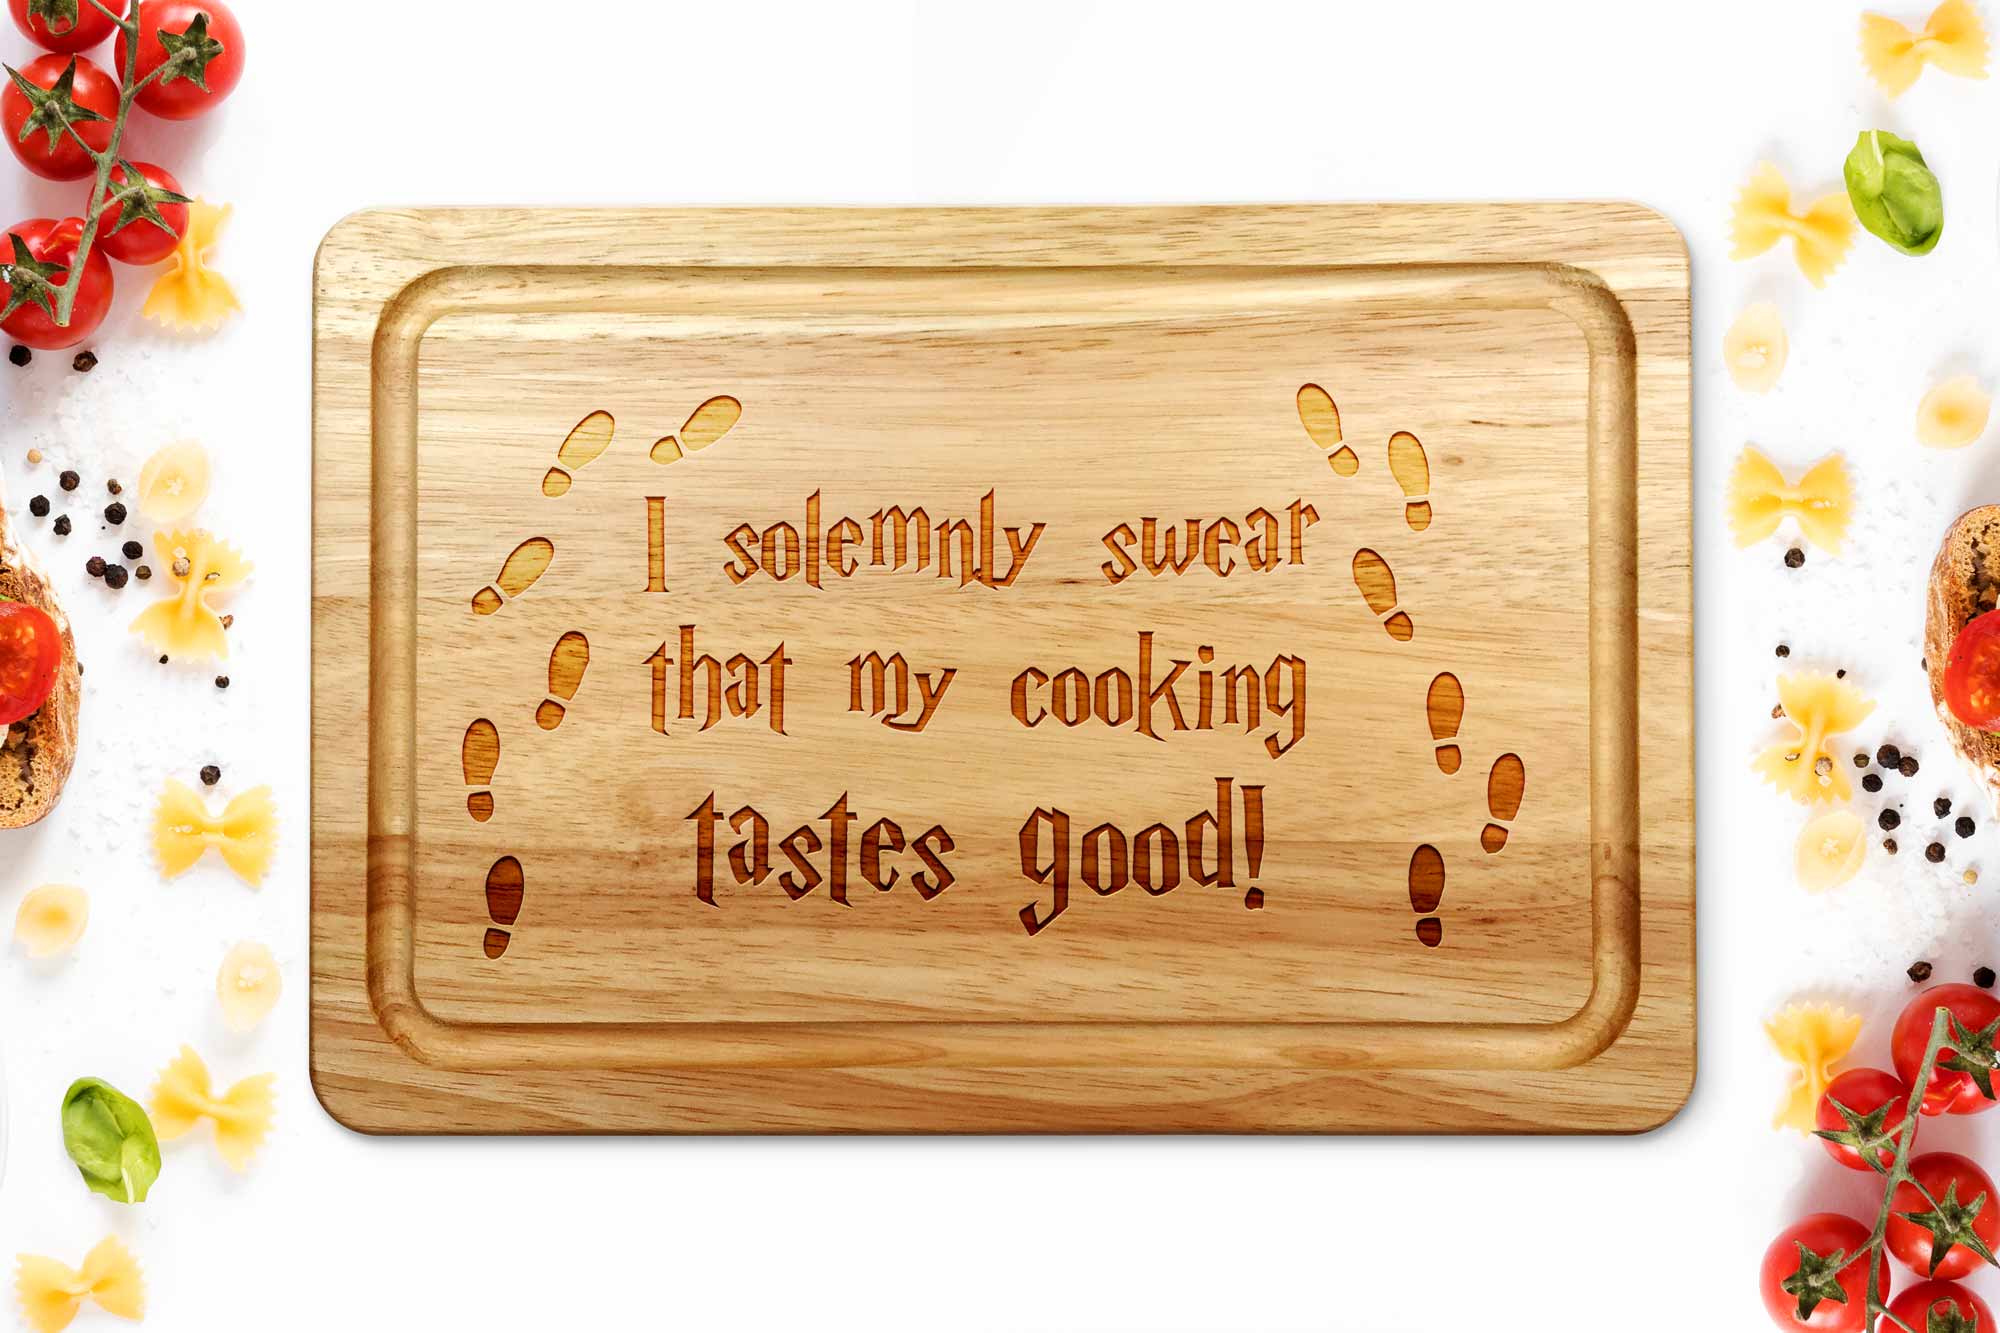 Harry Potter style chopping board on a white background